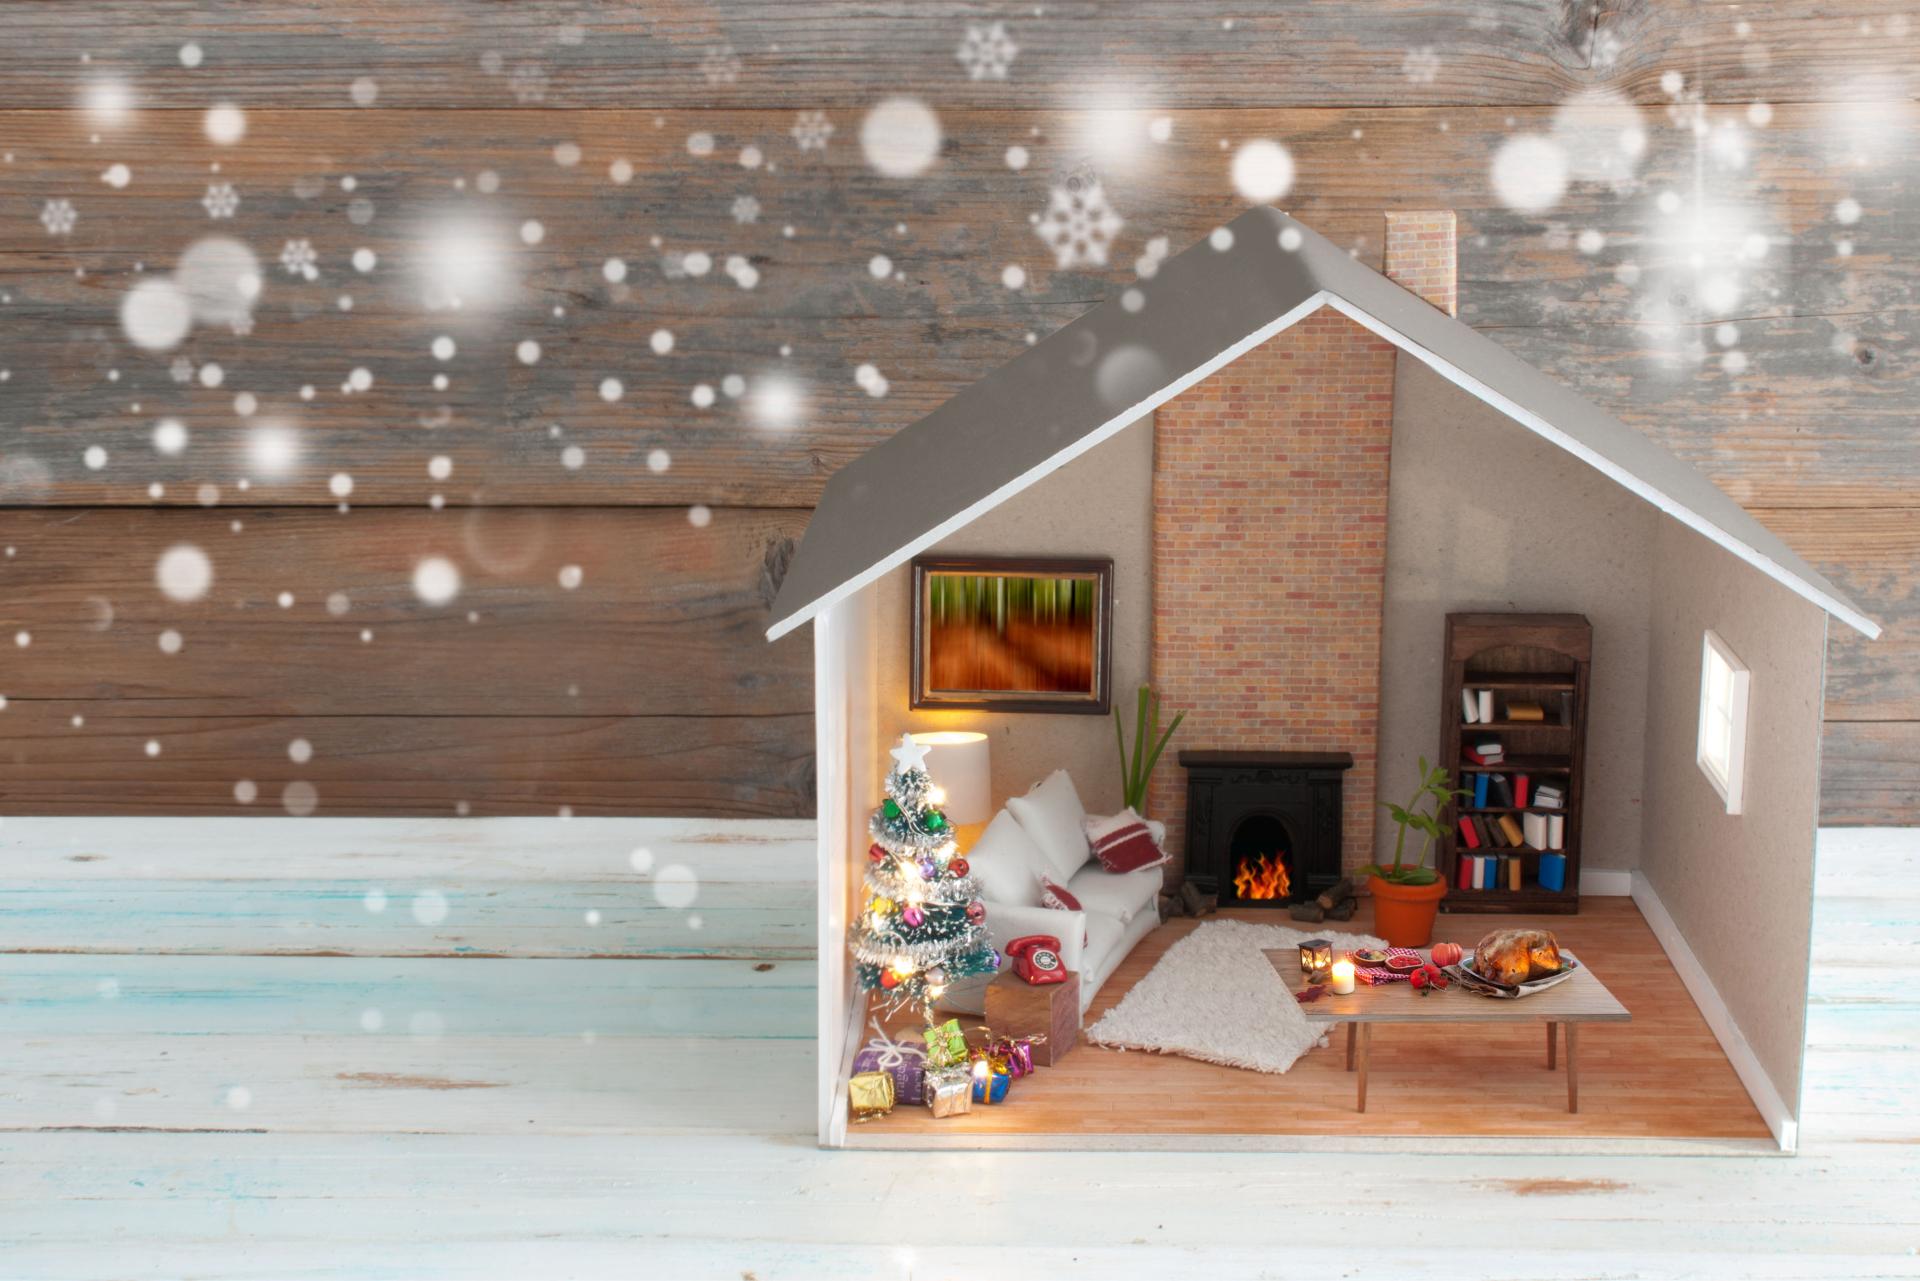 Hand crafted model home at Christmas - selling house at christmas